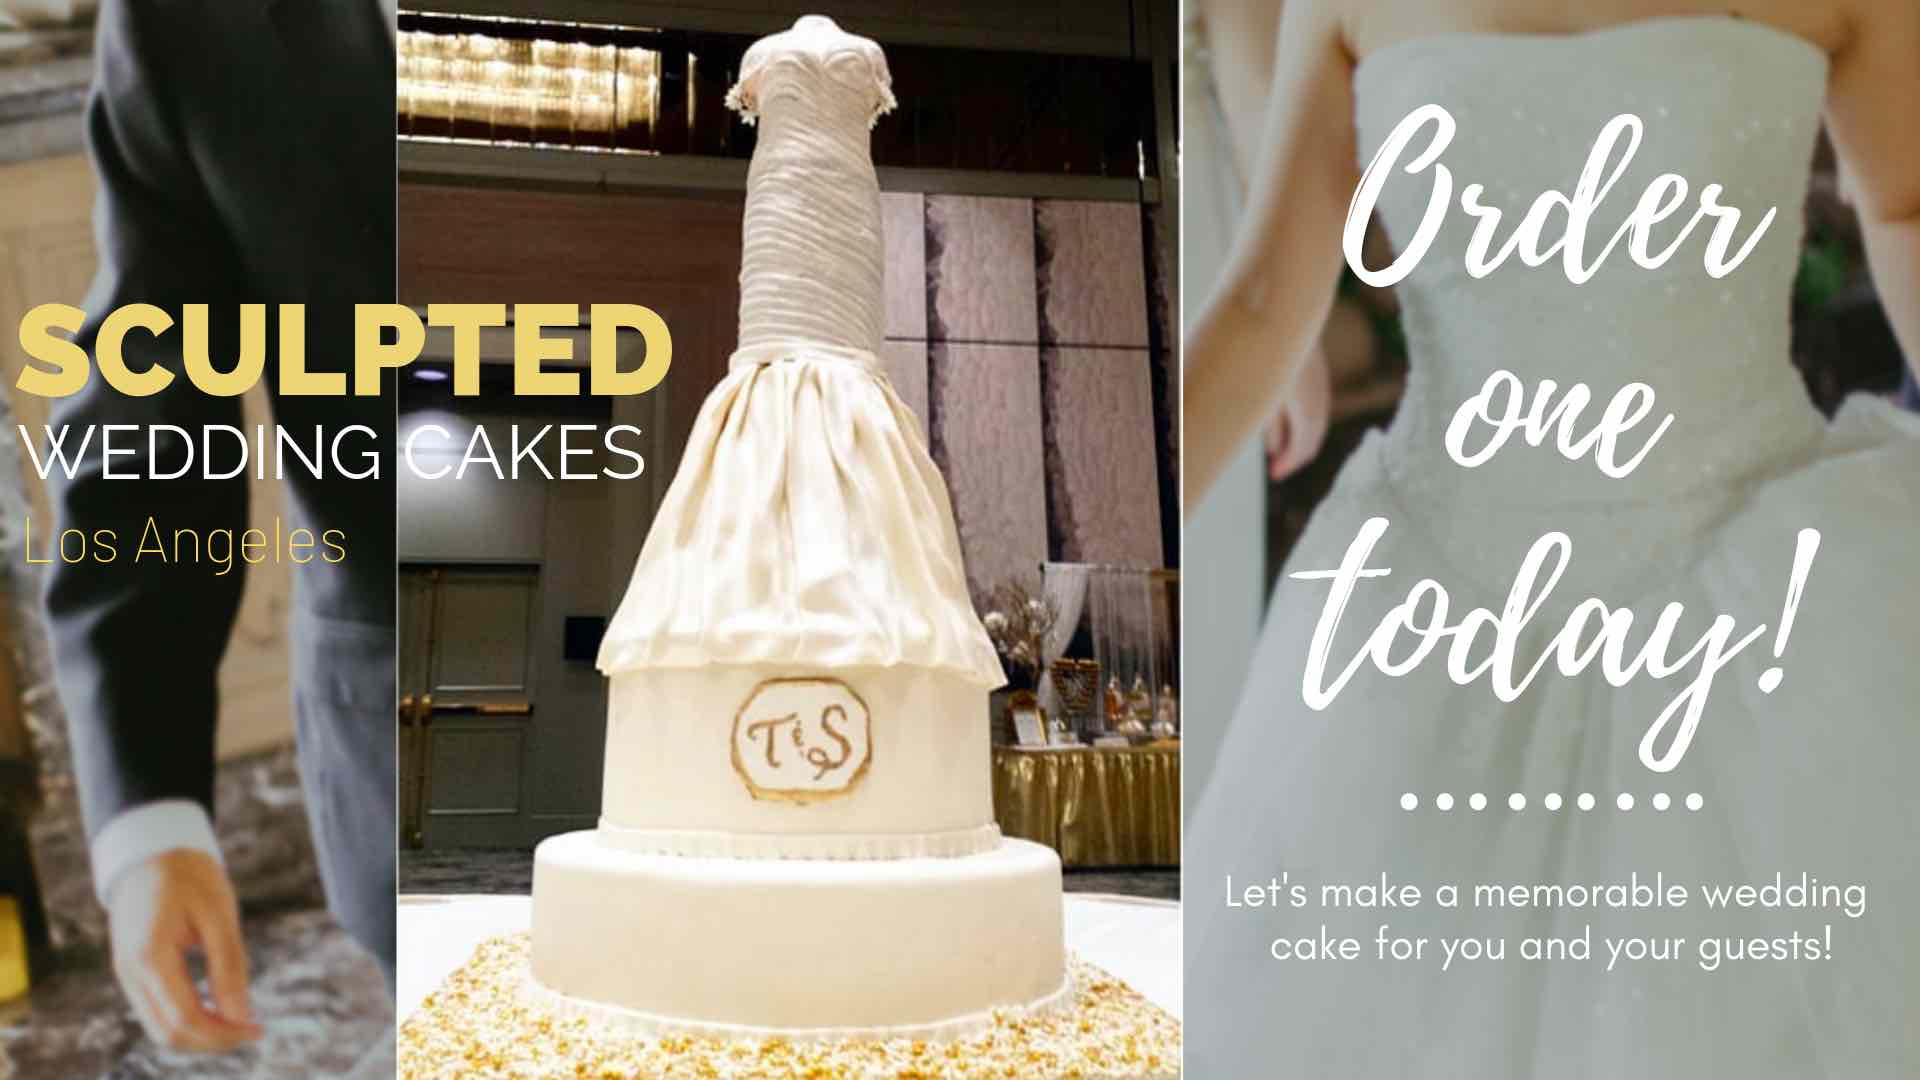 https://kayescakedesigns.com/wp-content/uploads/2019/02/Wedding-Cakes-Los-Angeles.jpg